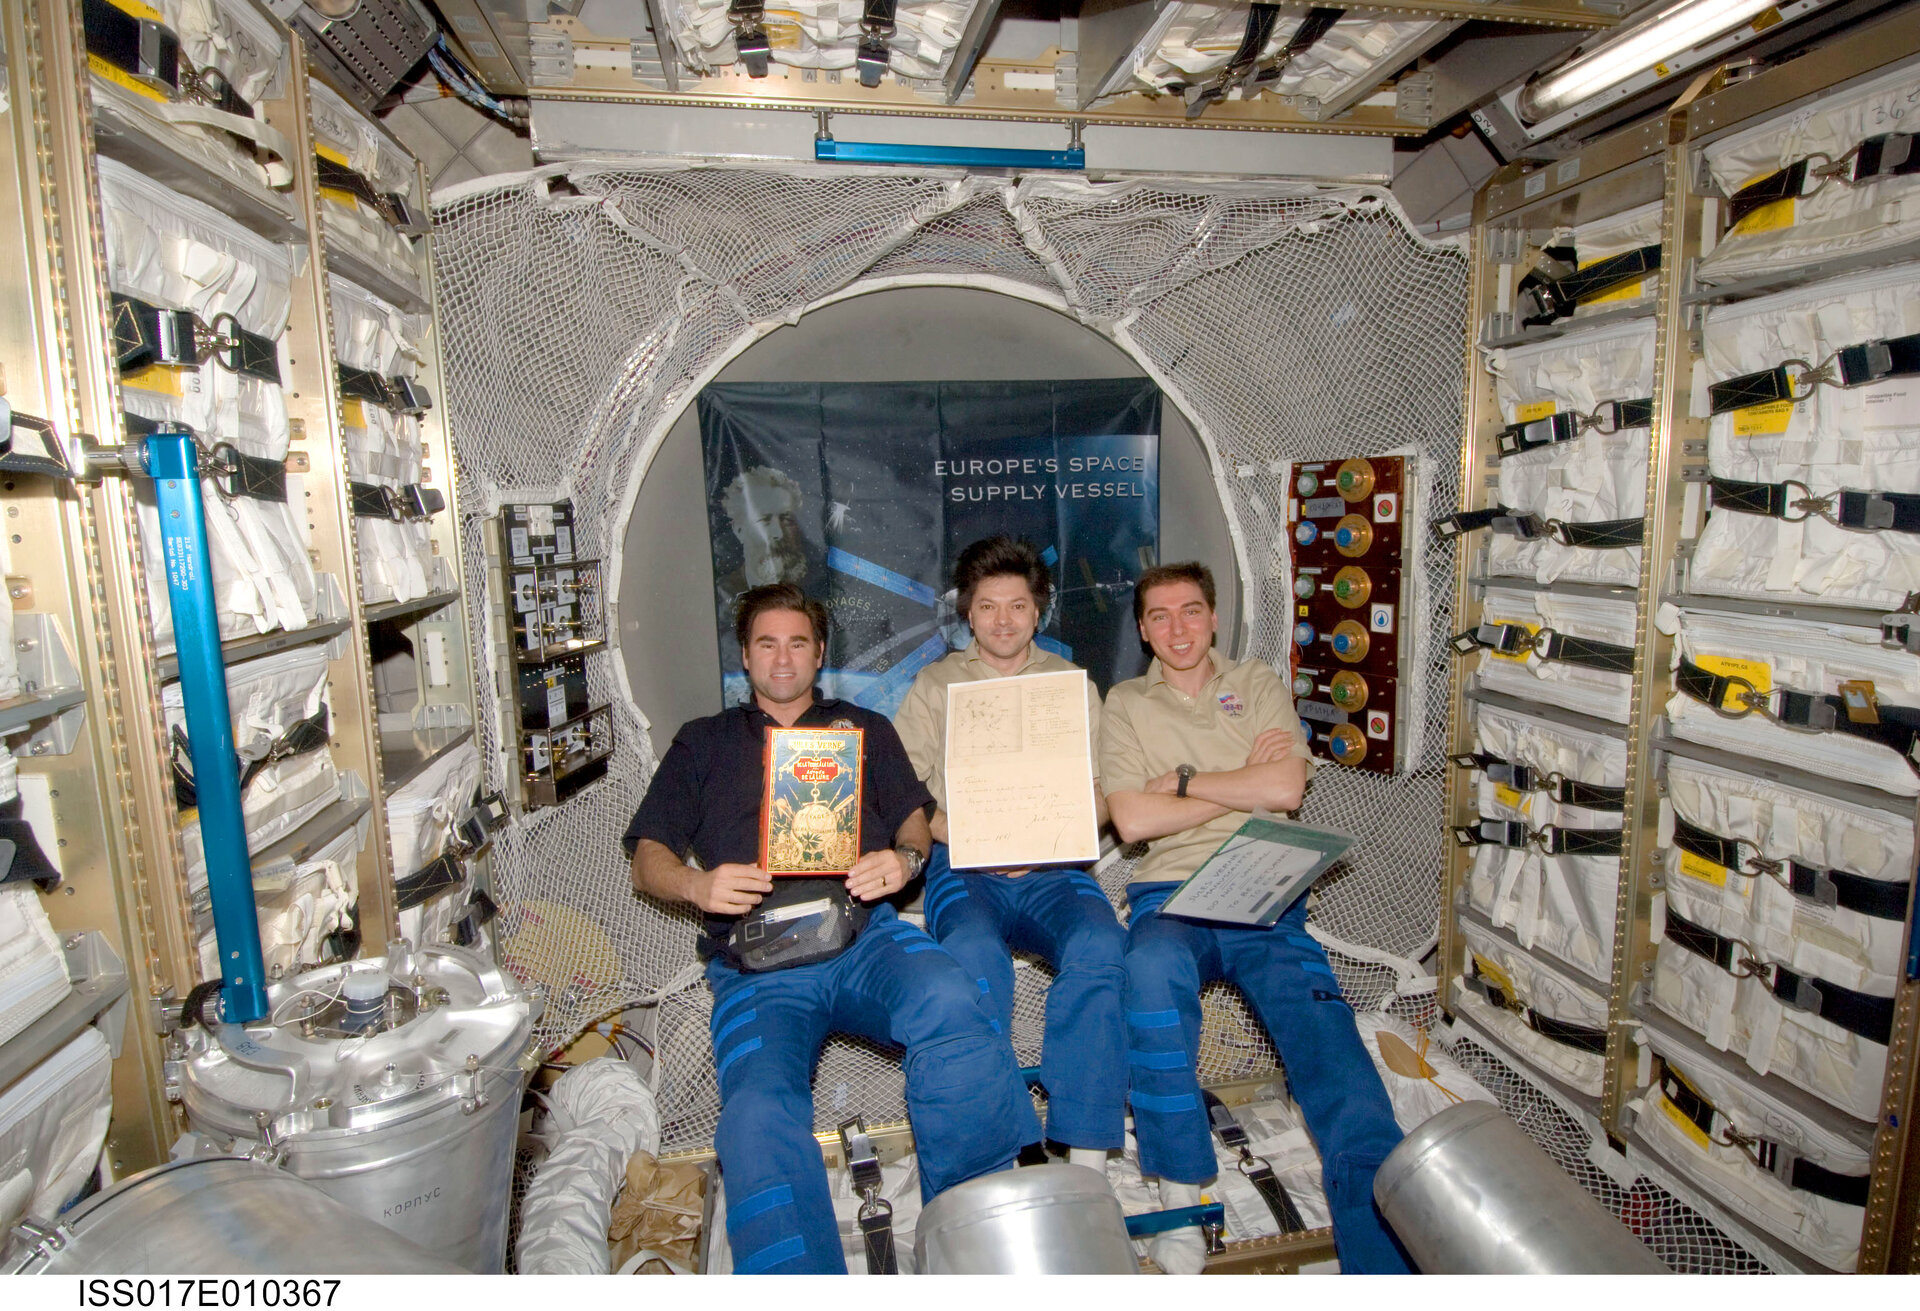 ISS Expedition crewmembers display the Jules Verne book and manuscripts delivered to the ISS